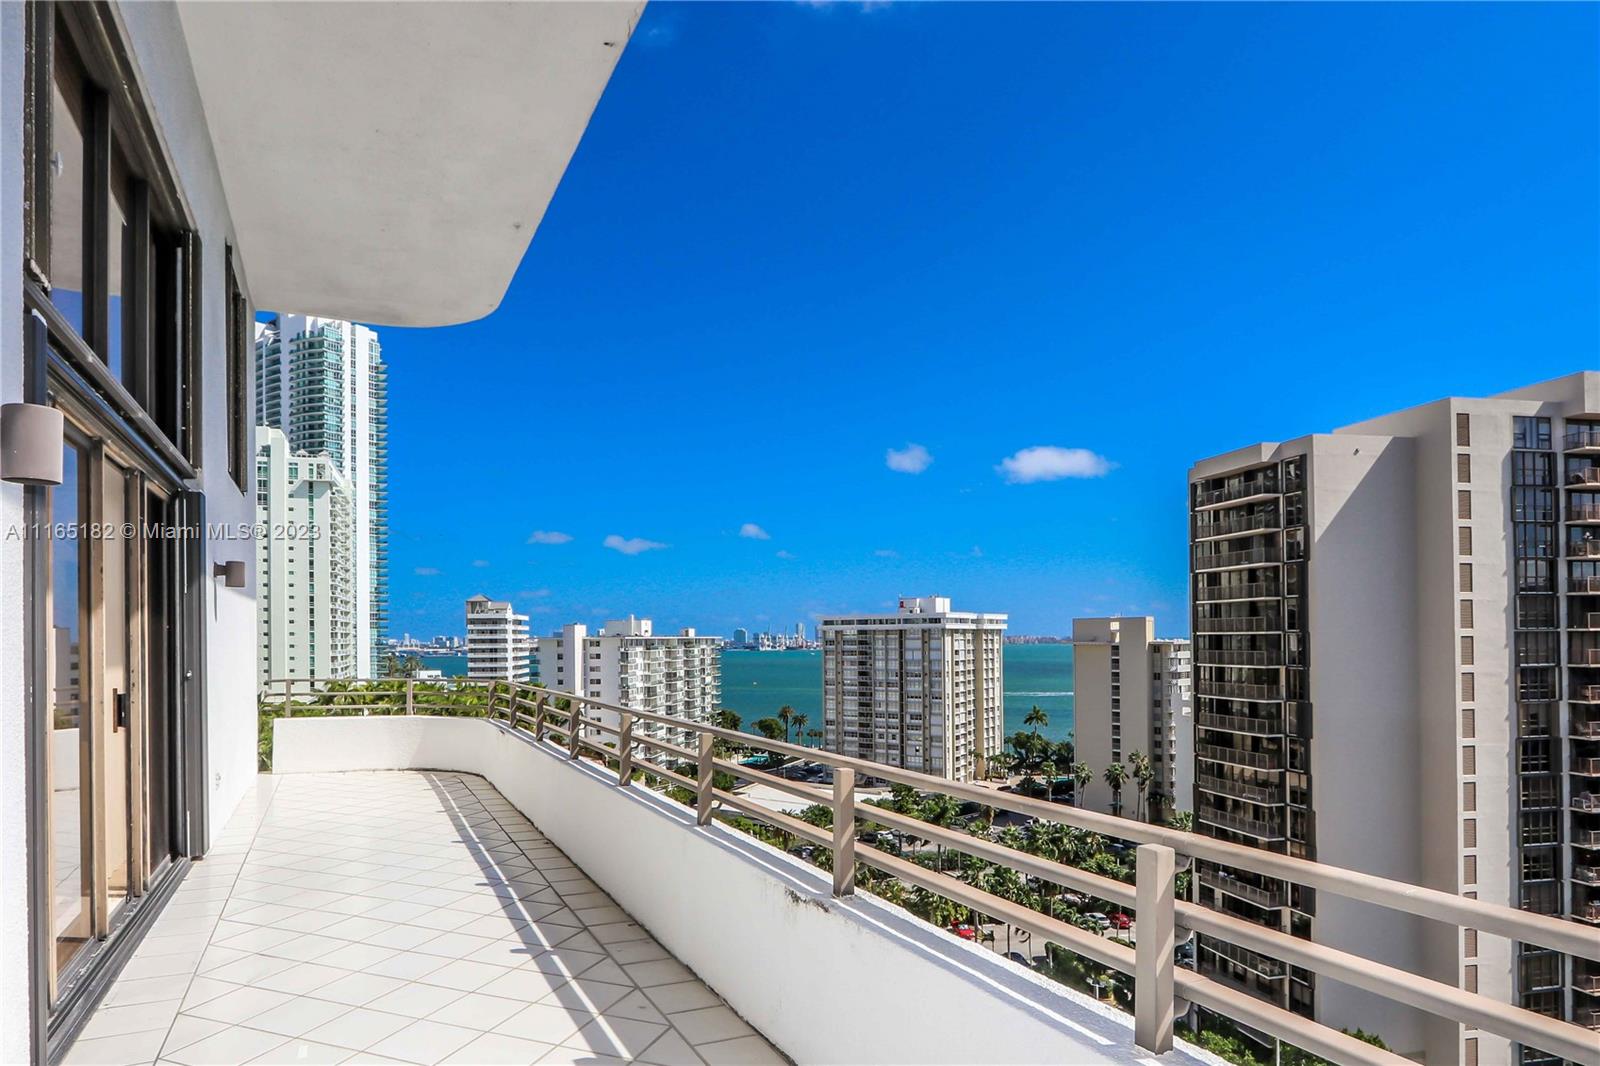 It's all about the views. This 4/4.5 townhouse is located on the 15th floor with 20 ft ceilings as you enter the front door facing the water. Every room has a water view as there are 3 over sized balconies. Unit is over 3000 sq ft so it feels more like a house than a condo. Your view will never change. The interior is ready to make your own with a few up grades. Marble floors in the living area and carpet in the bedrooms. Location is perfect for walking to local restaurants, shopping. The building has 24 hour security as well as a renovated gym, pool, jacuzzi and bbq area. Small boutique building with only 66 units. Very well managed. Another plus is there are only 3 units per floor and this is 2 units combined. Only 1 neighbor.